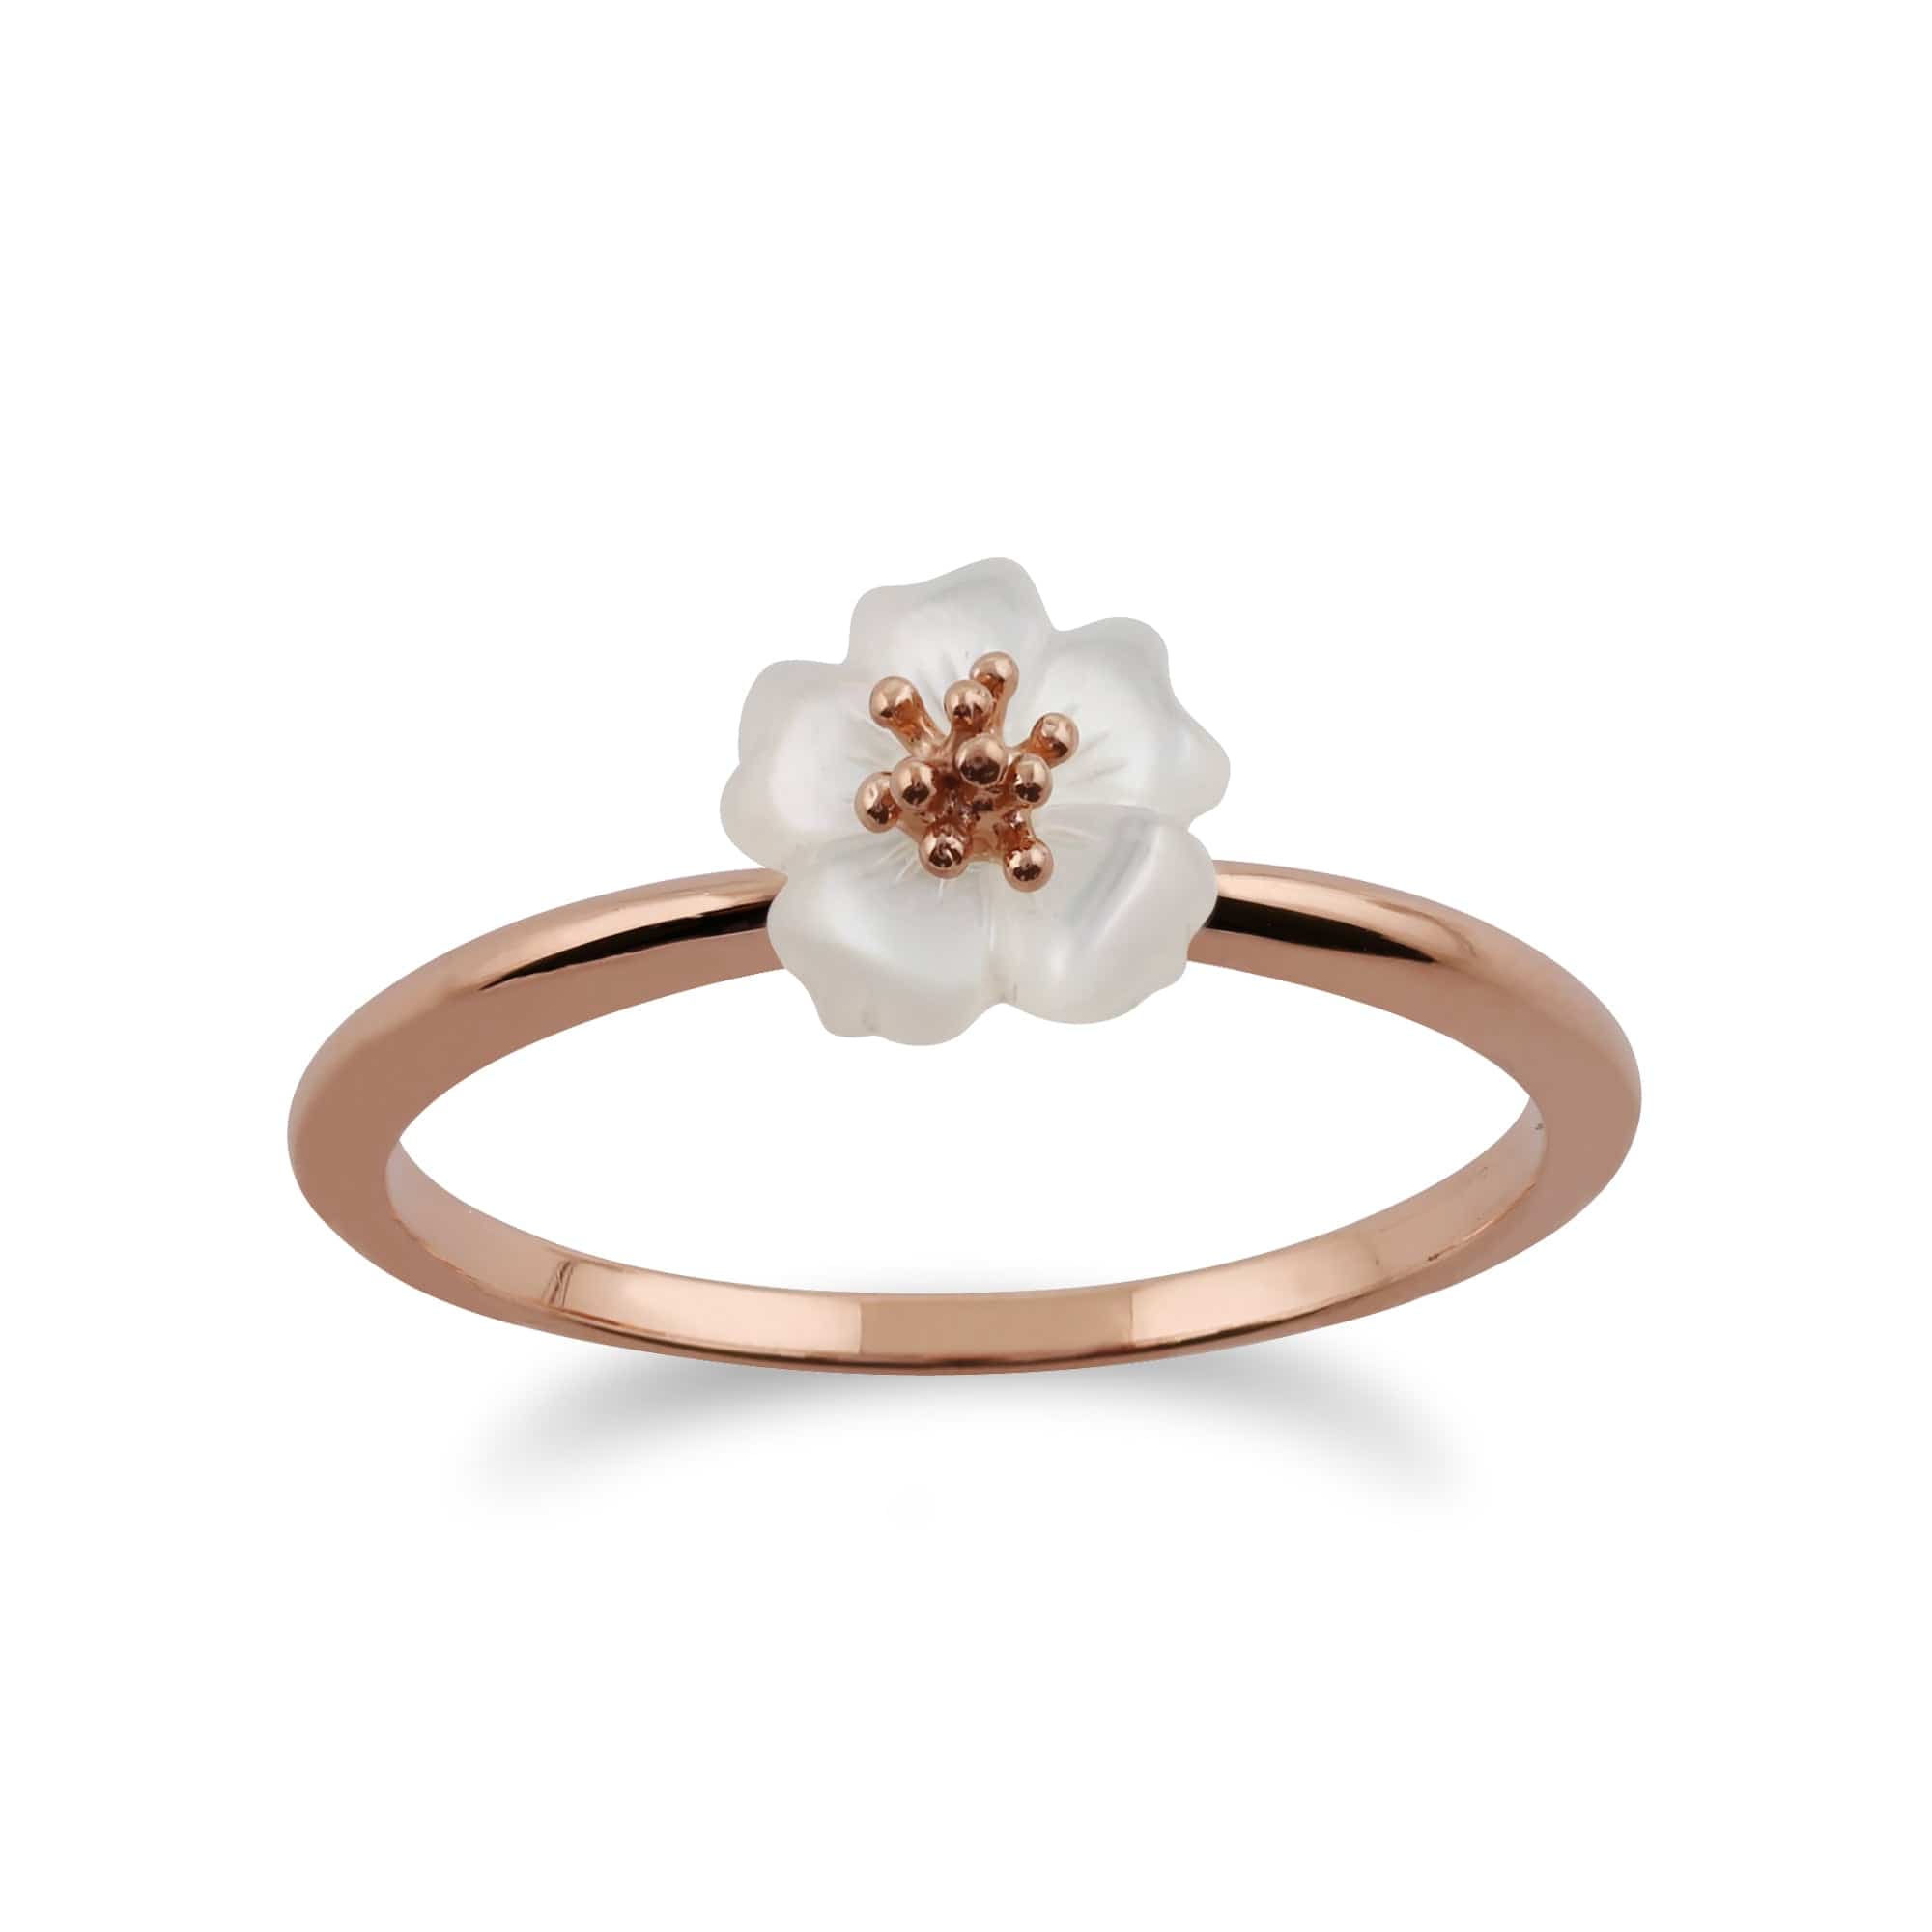 Gemondo Rose Gold Plated Silver Mother of Pearl Cherry Blossom Ring Image 1